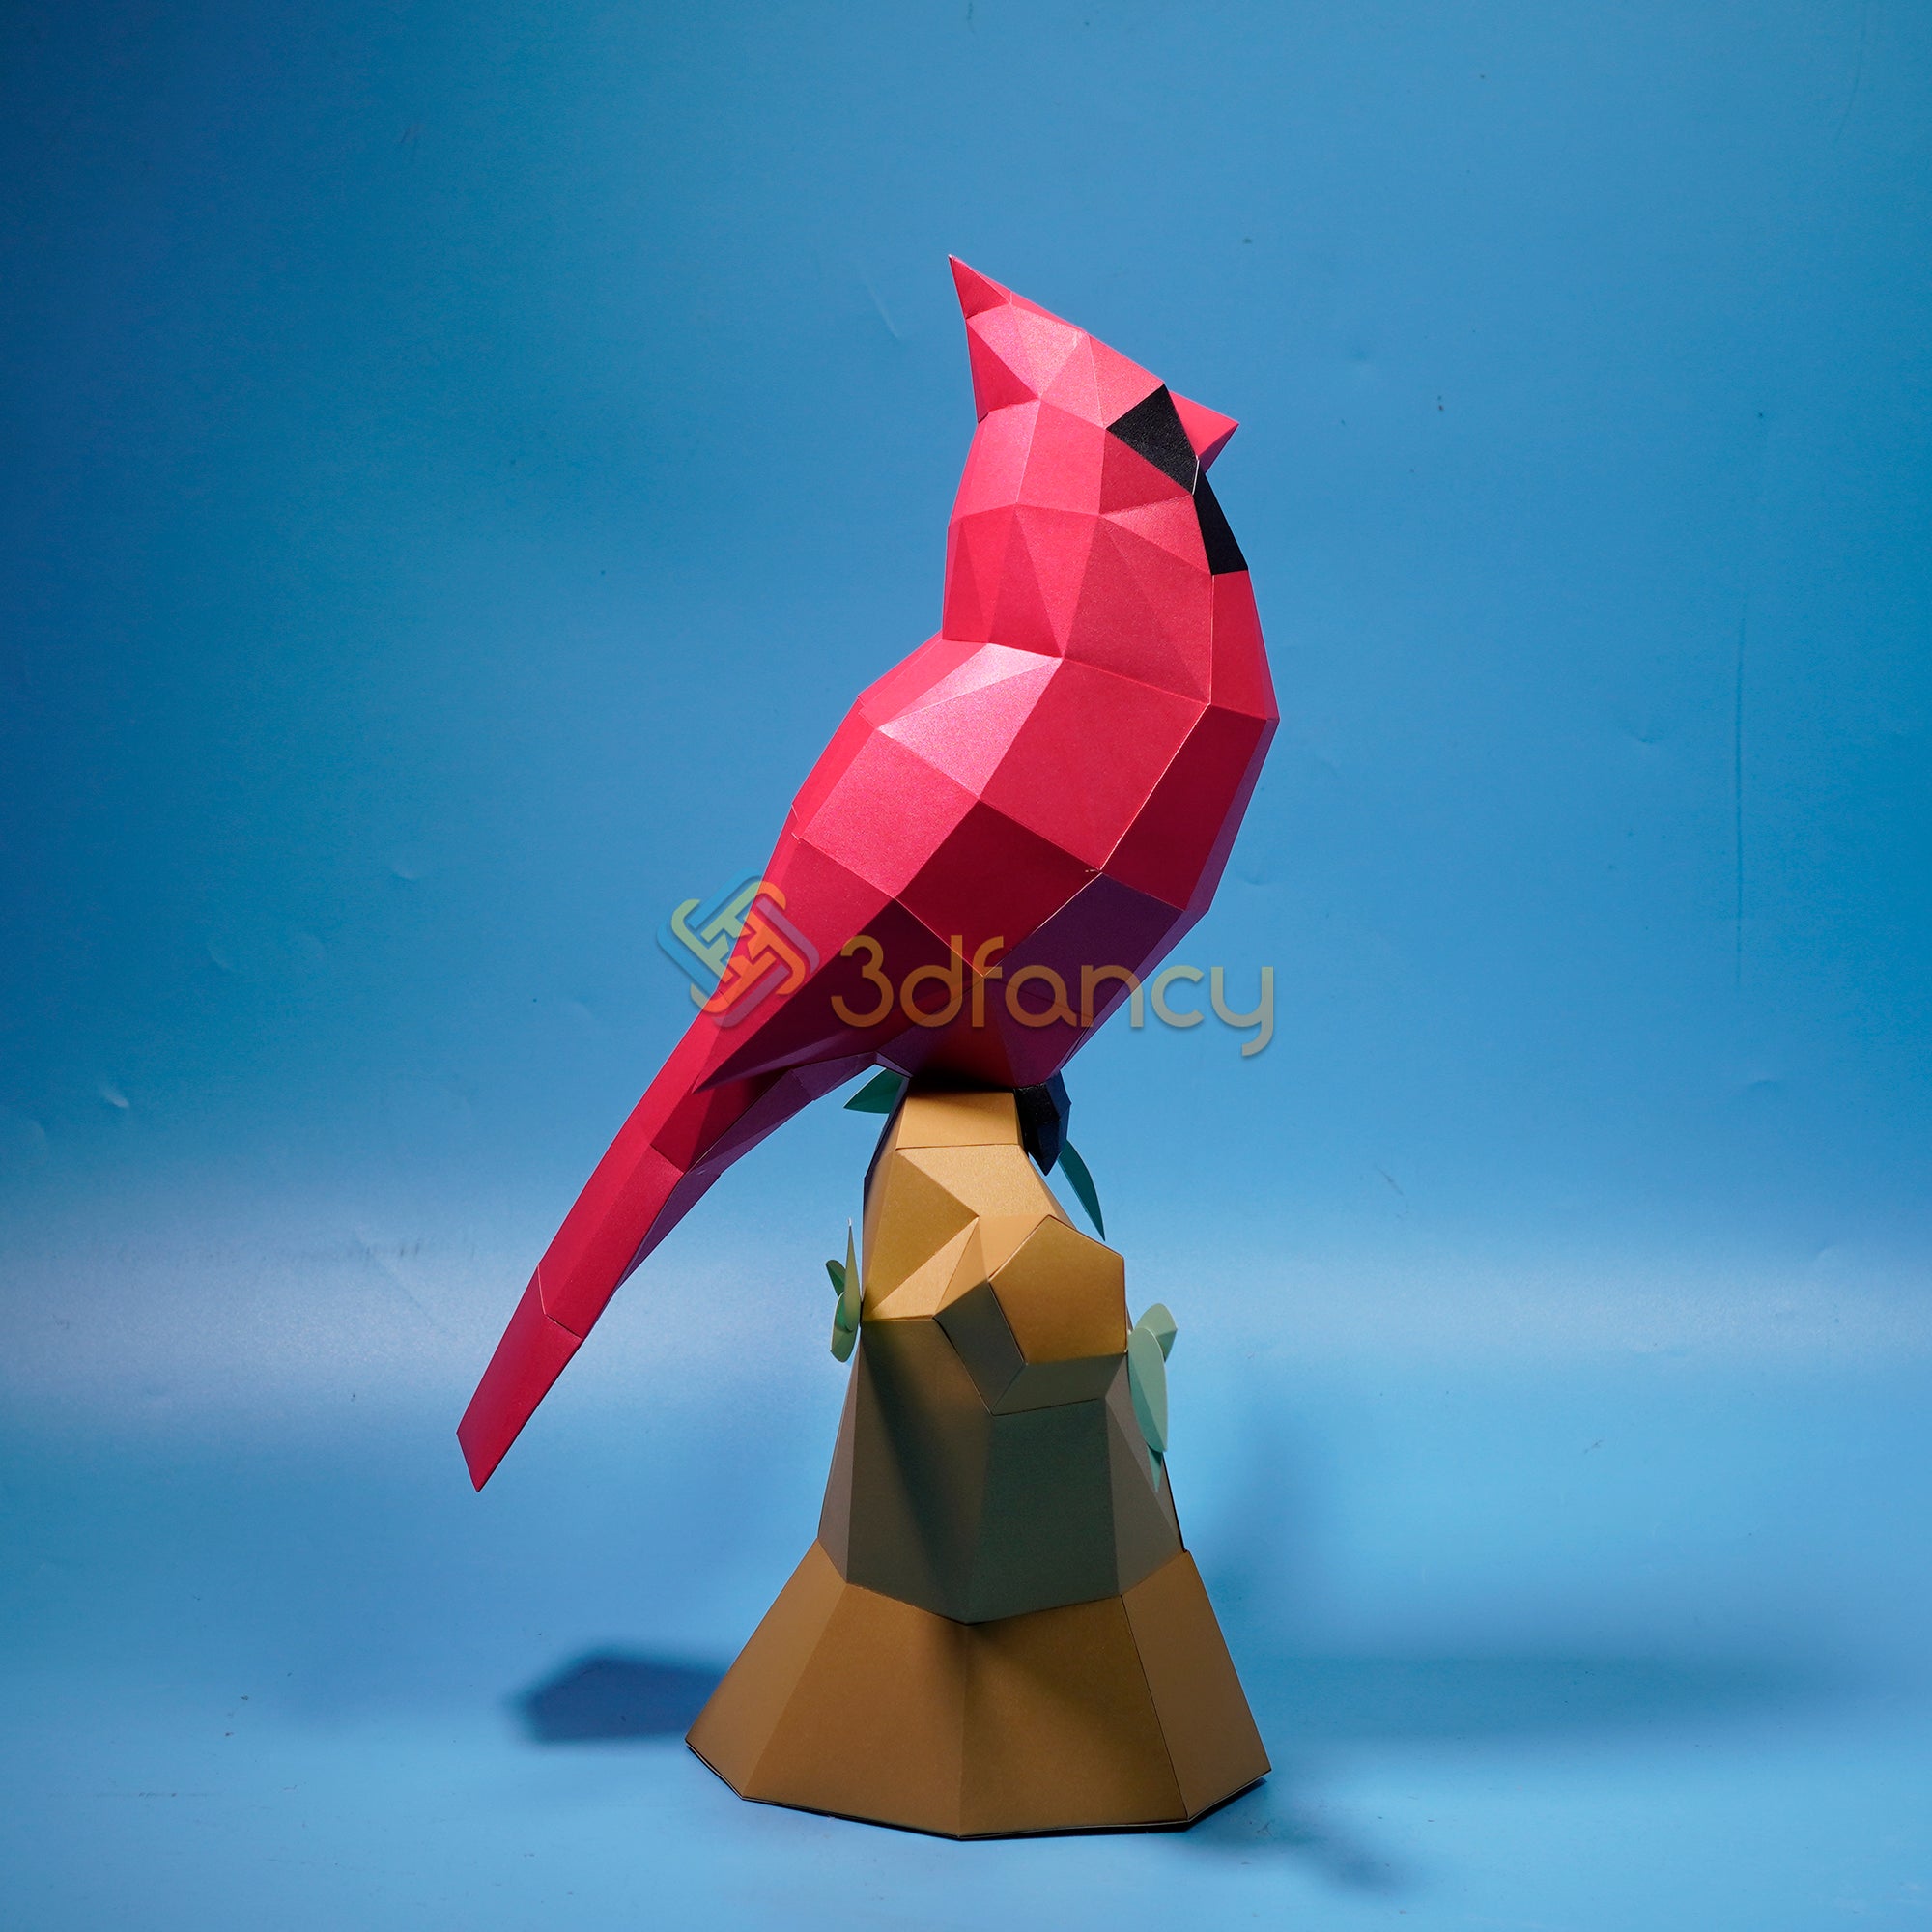 Cardinal Bird Papercraft PDF for Printer, SVG for Cricut Projects - DIY Low Poly Red Bird Paper Sculpture for Christmas Decoration